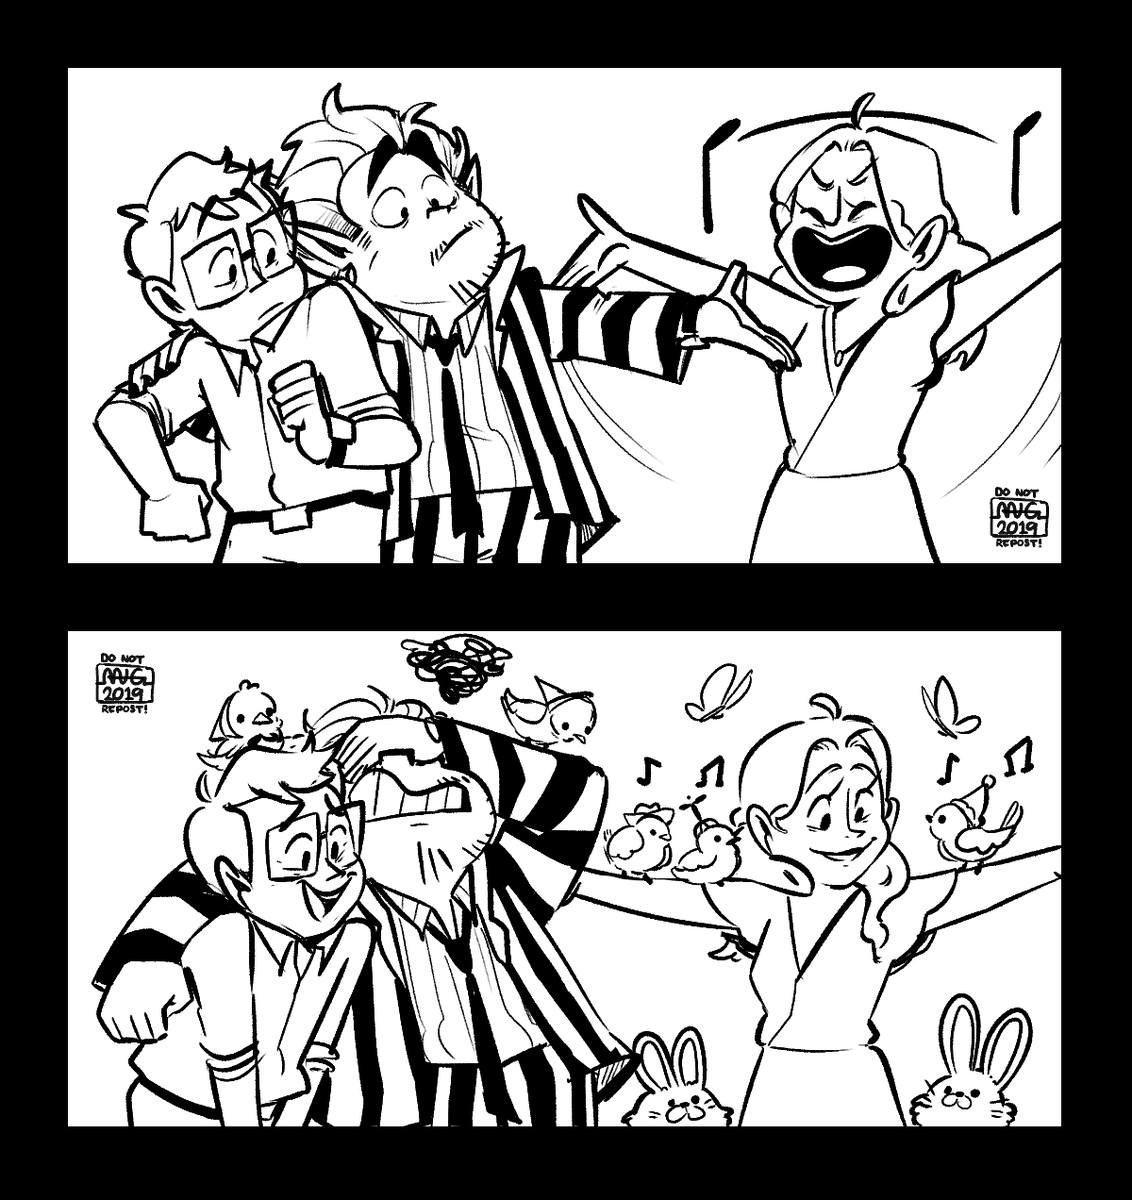 give me your best primal scream! 

(yes it's 2020, but i forgot to put this up over the holidays) 

#beetlejuicebway #beetlejuicethemusical 